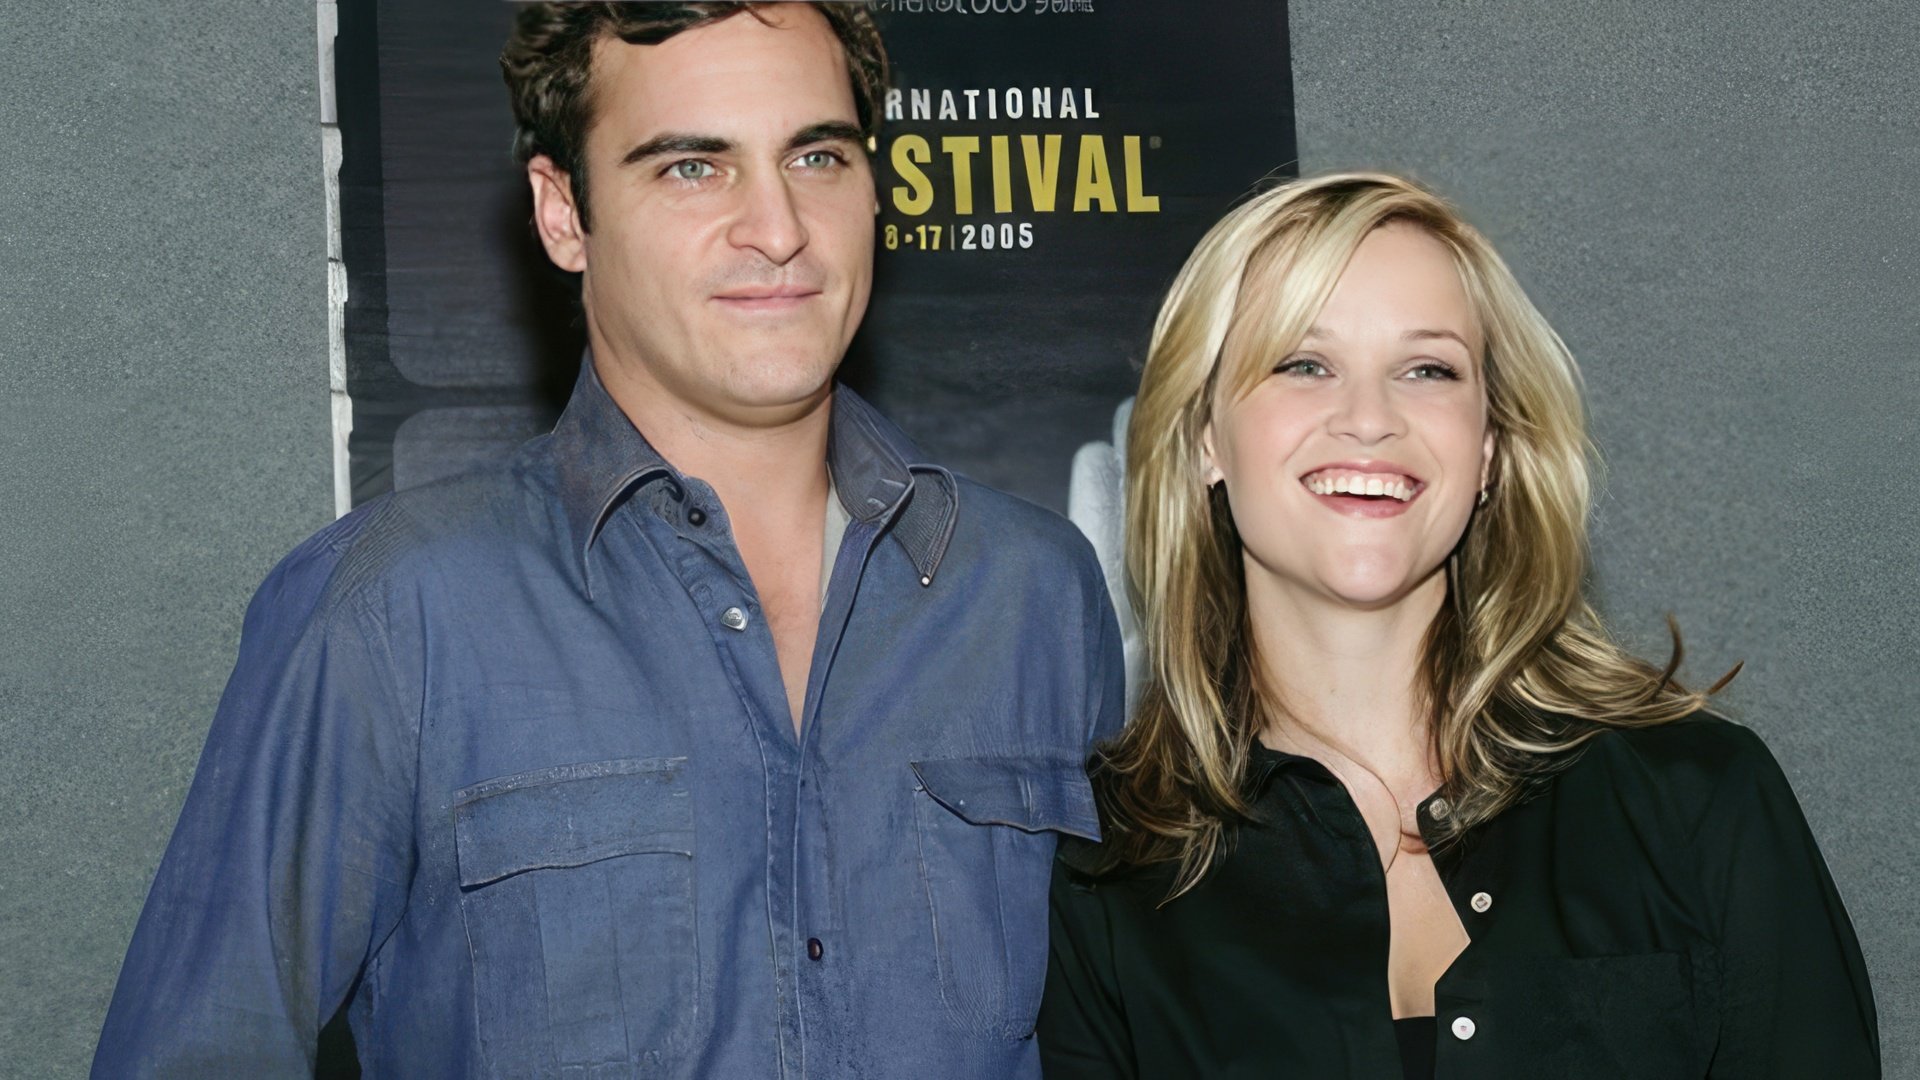 Joaquin Phoenix and Reese Witherspoon